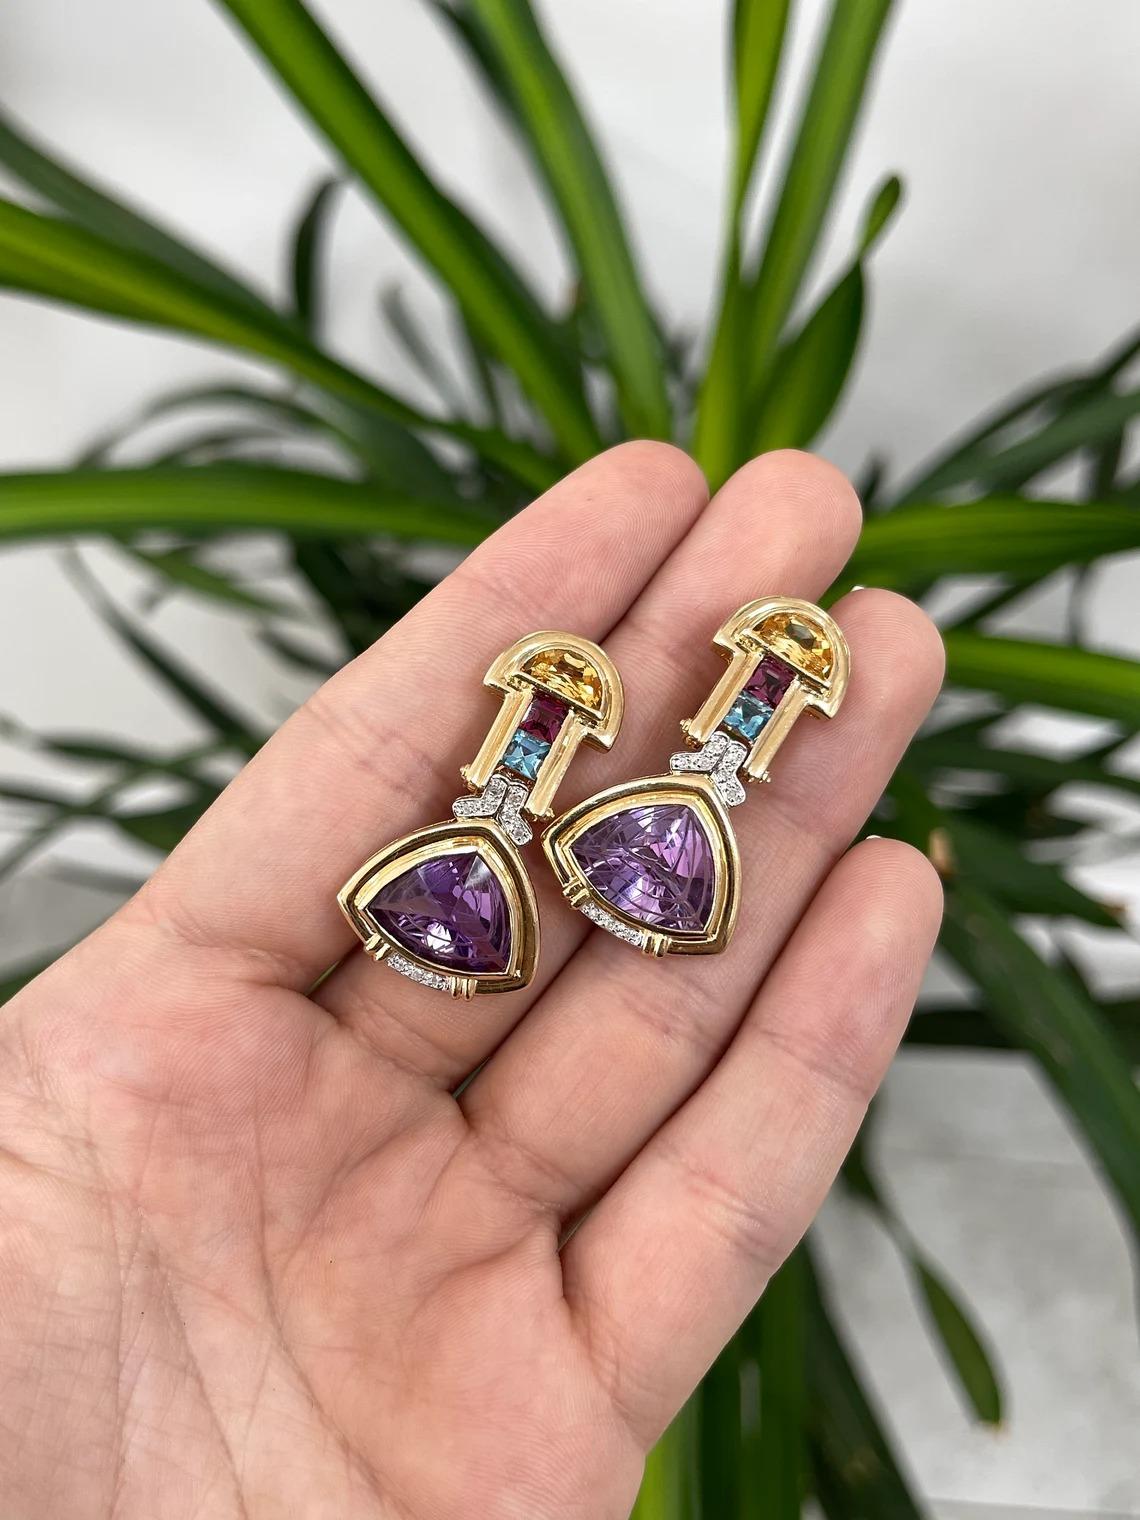 A gorgeous, and one of a kind piece set of multi-gemstone earrings. This lovely and exotic pair features five different stunning colored precious gemstones, such as Amethyst, Diamond, Blue & Pink Topaz, and Citrine. These gems come in multiple